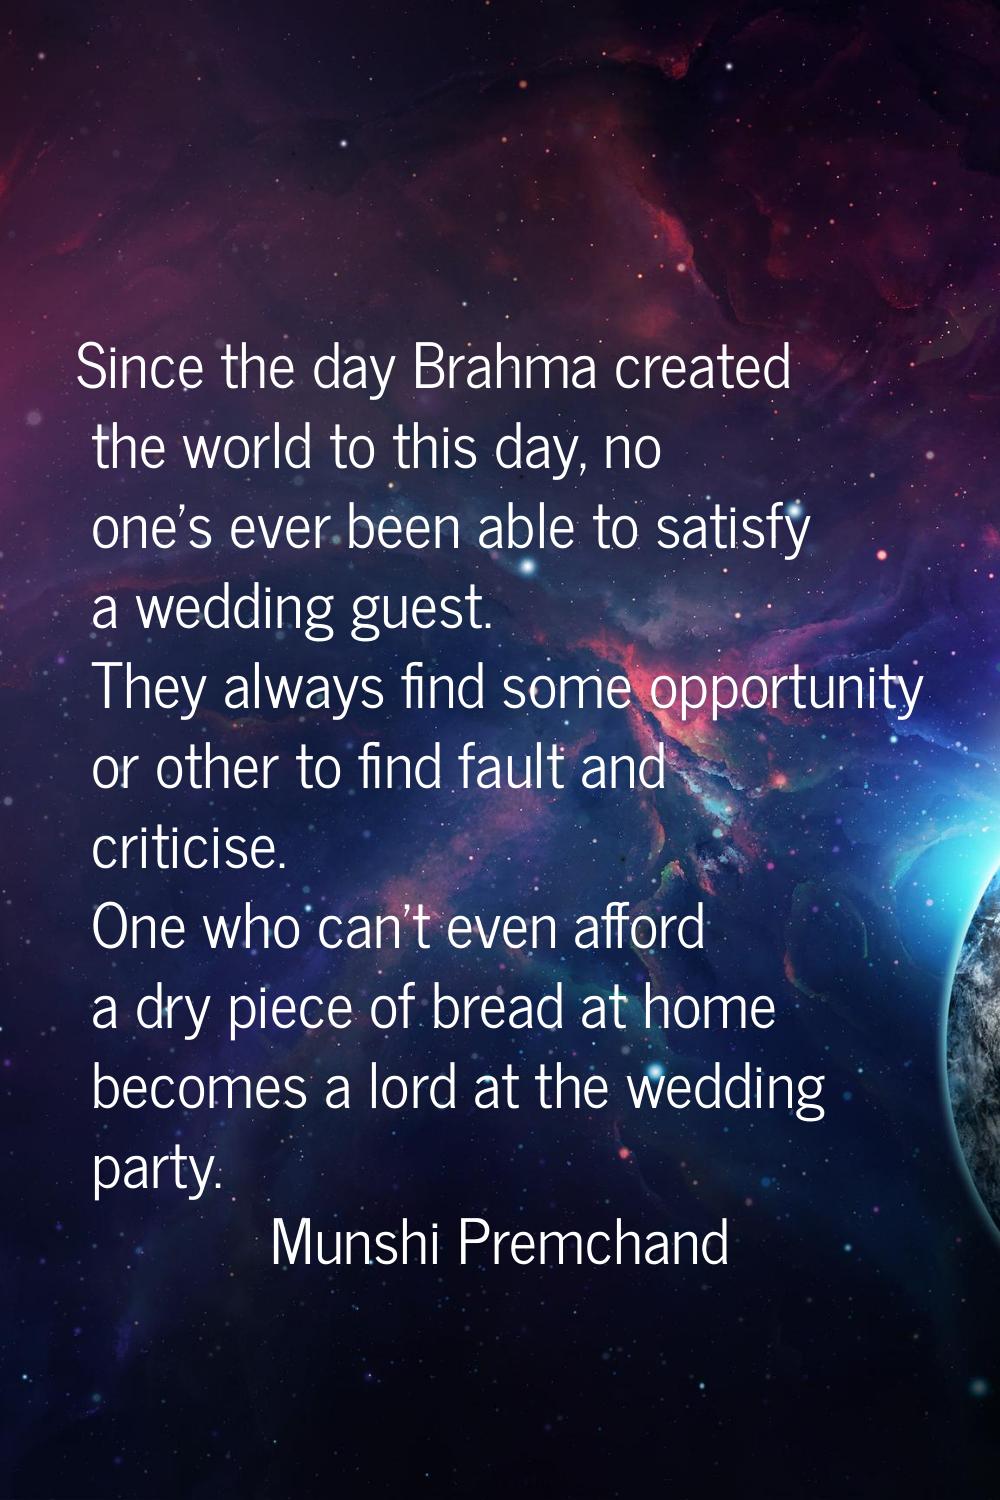 Since the day Brahma created the world to this day, no one's ever been able to satisfy a wedding gu